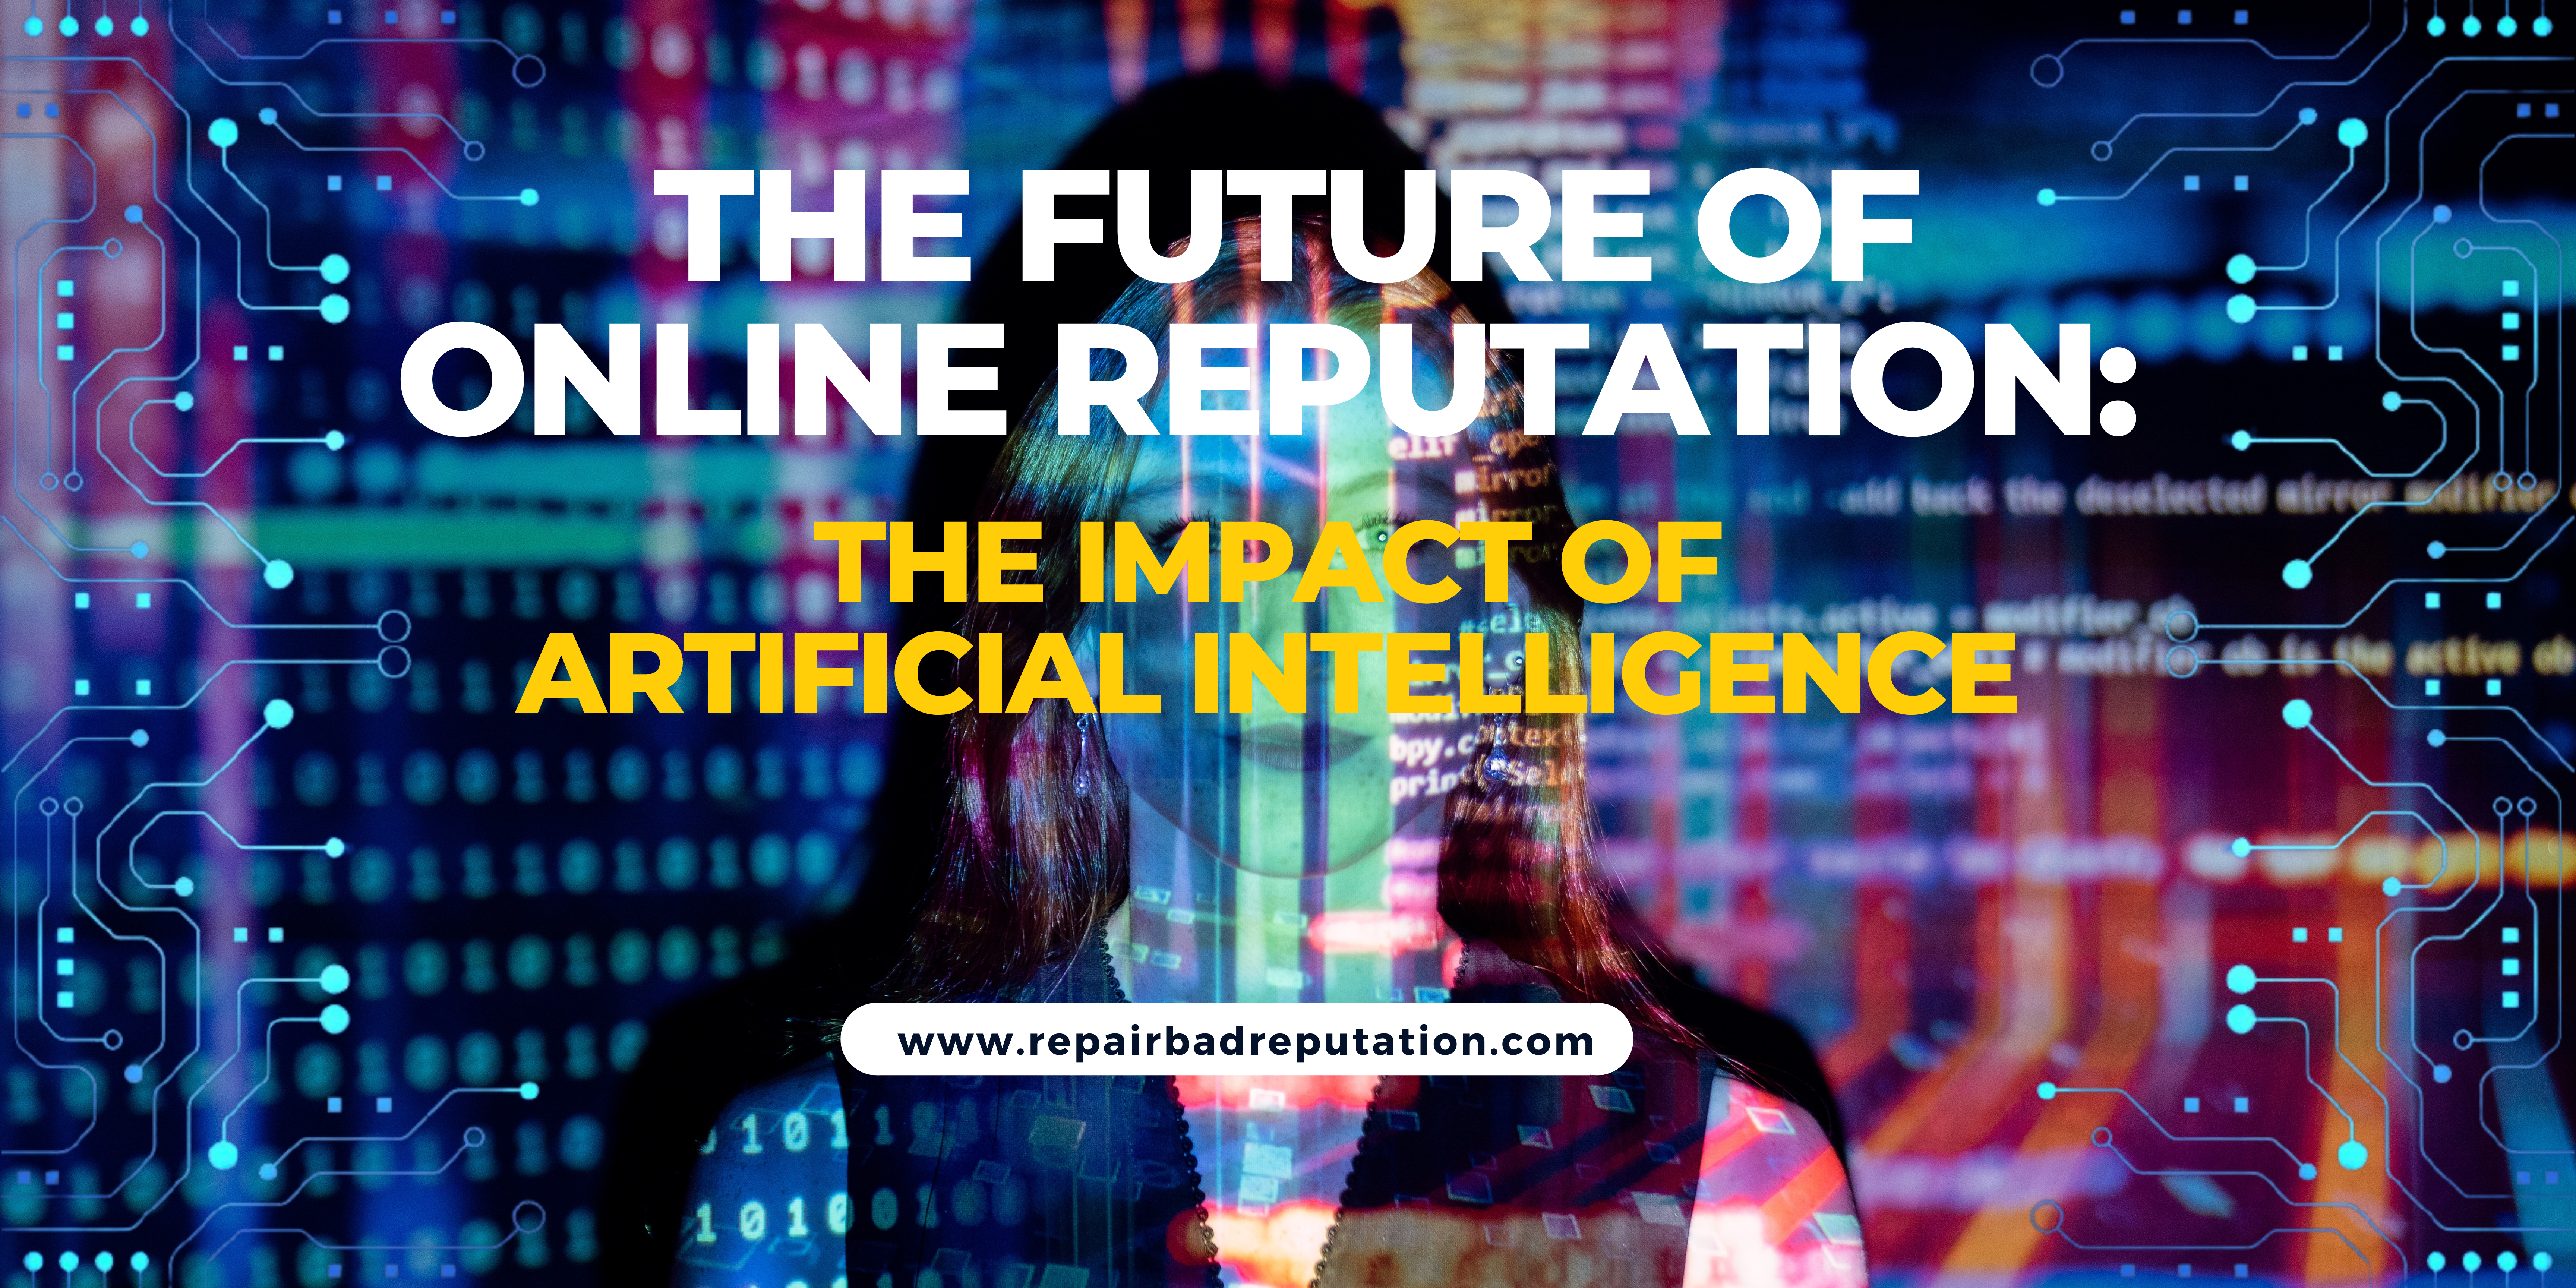 The Future of Online Reputation The Impact of Artificial Intelligence